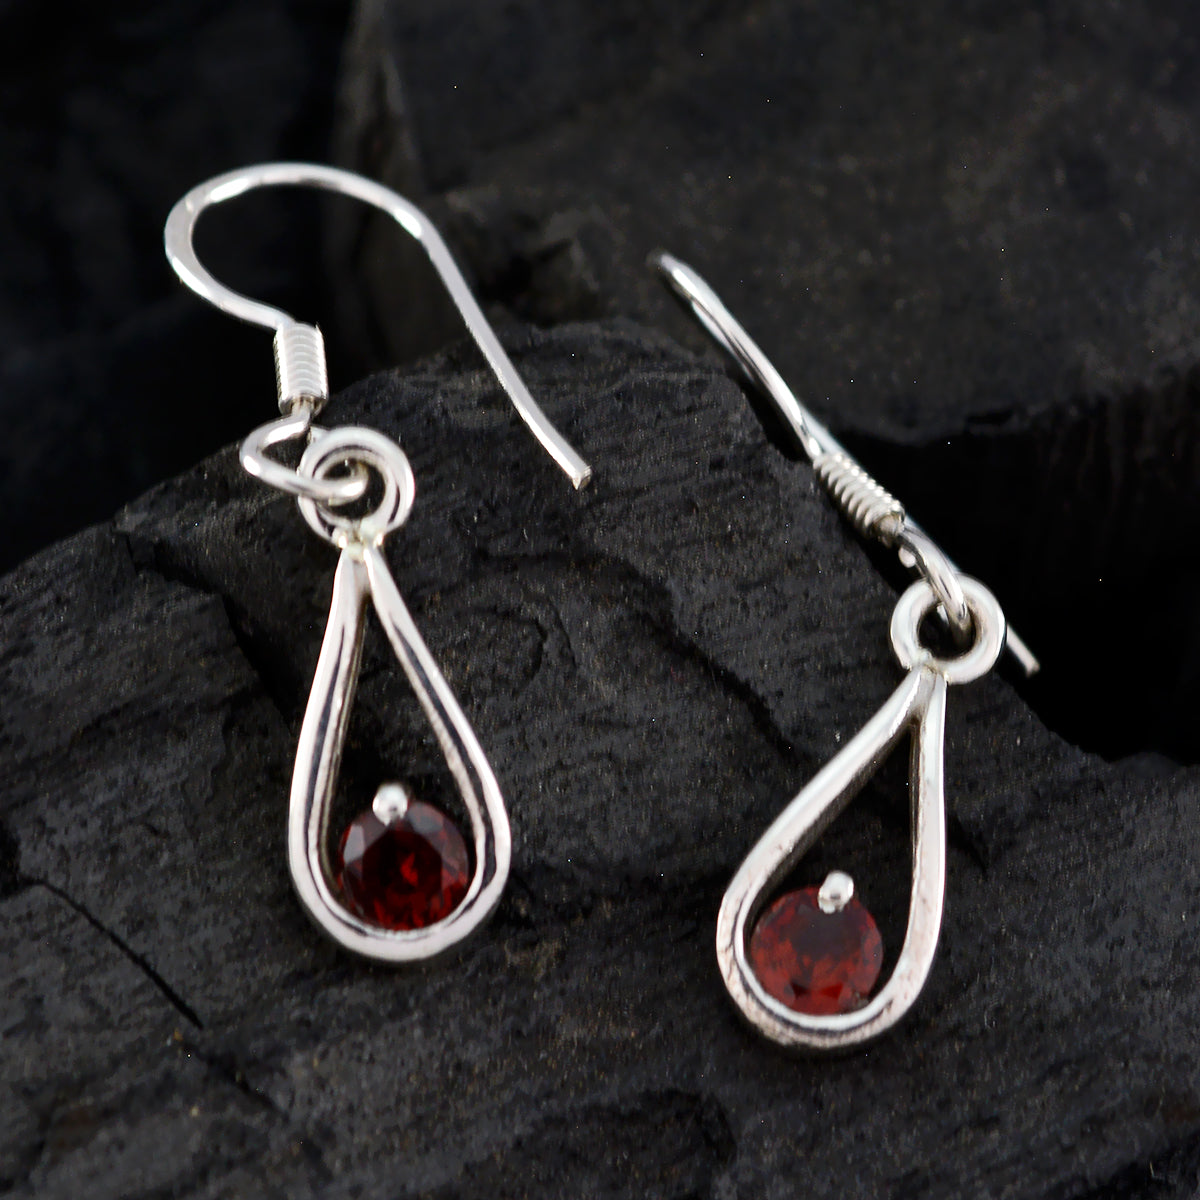 Riyo Good Gemstones round Faceted Red Garnet Silver Earrings gift for Faishonable day